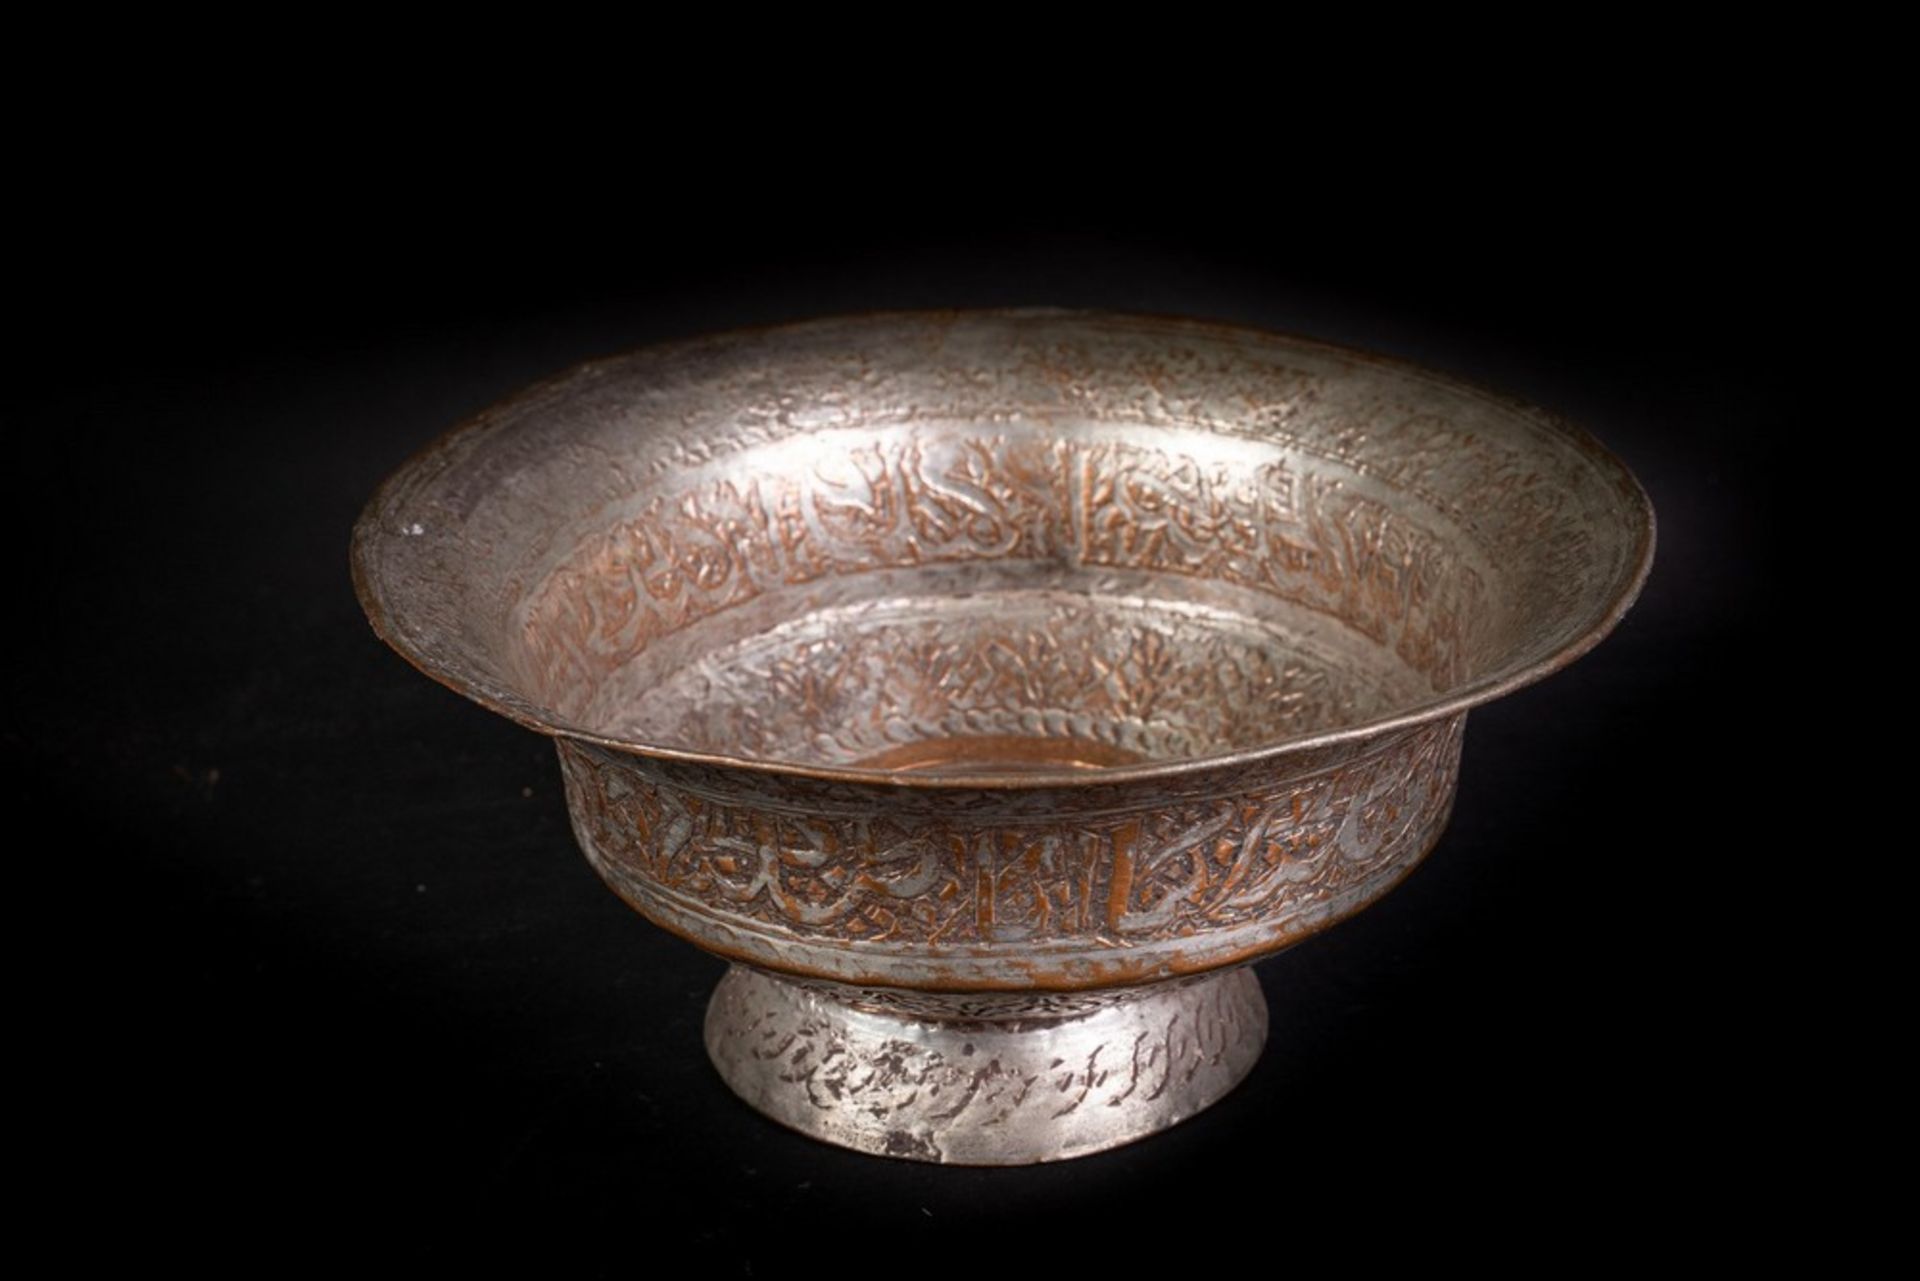 Arte Islamica An embossed tinned copper bowl with inscriptions Folk Safavid Persia, 17th-18th centu